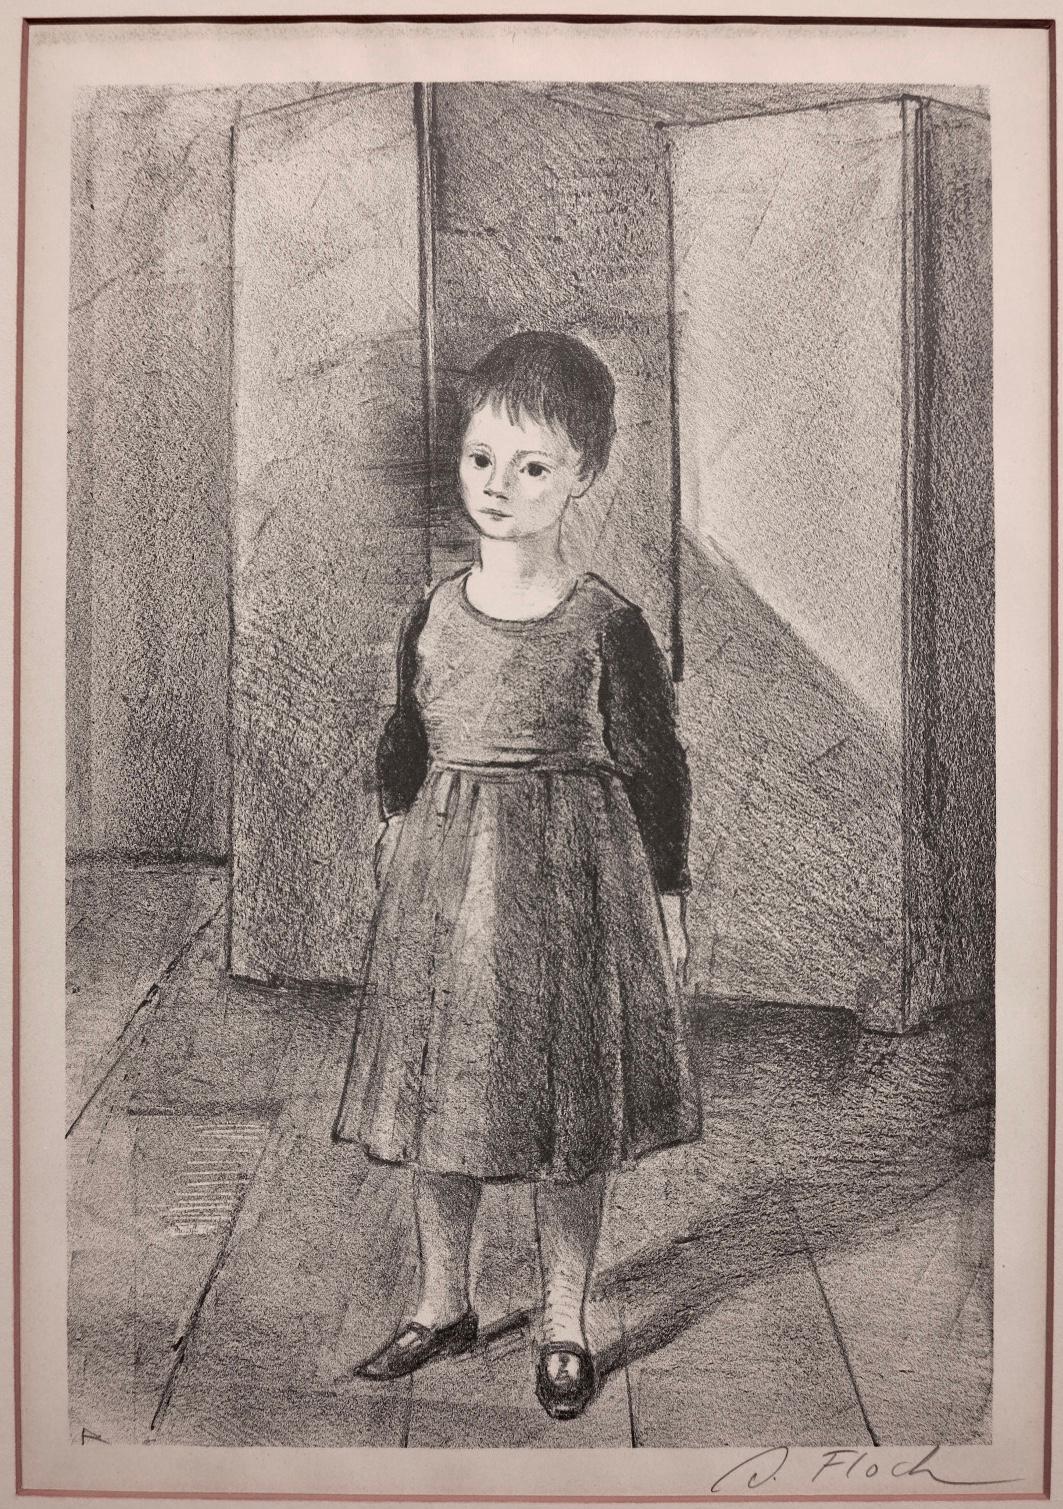 Joseph Floch Figurative Print - Portrait of a Young Girl (the artist's daughter). 